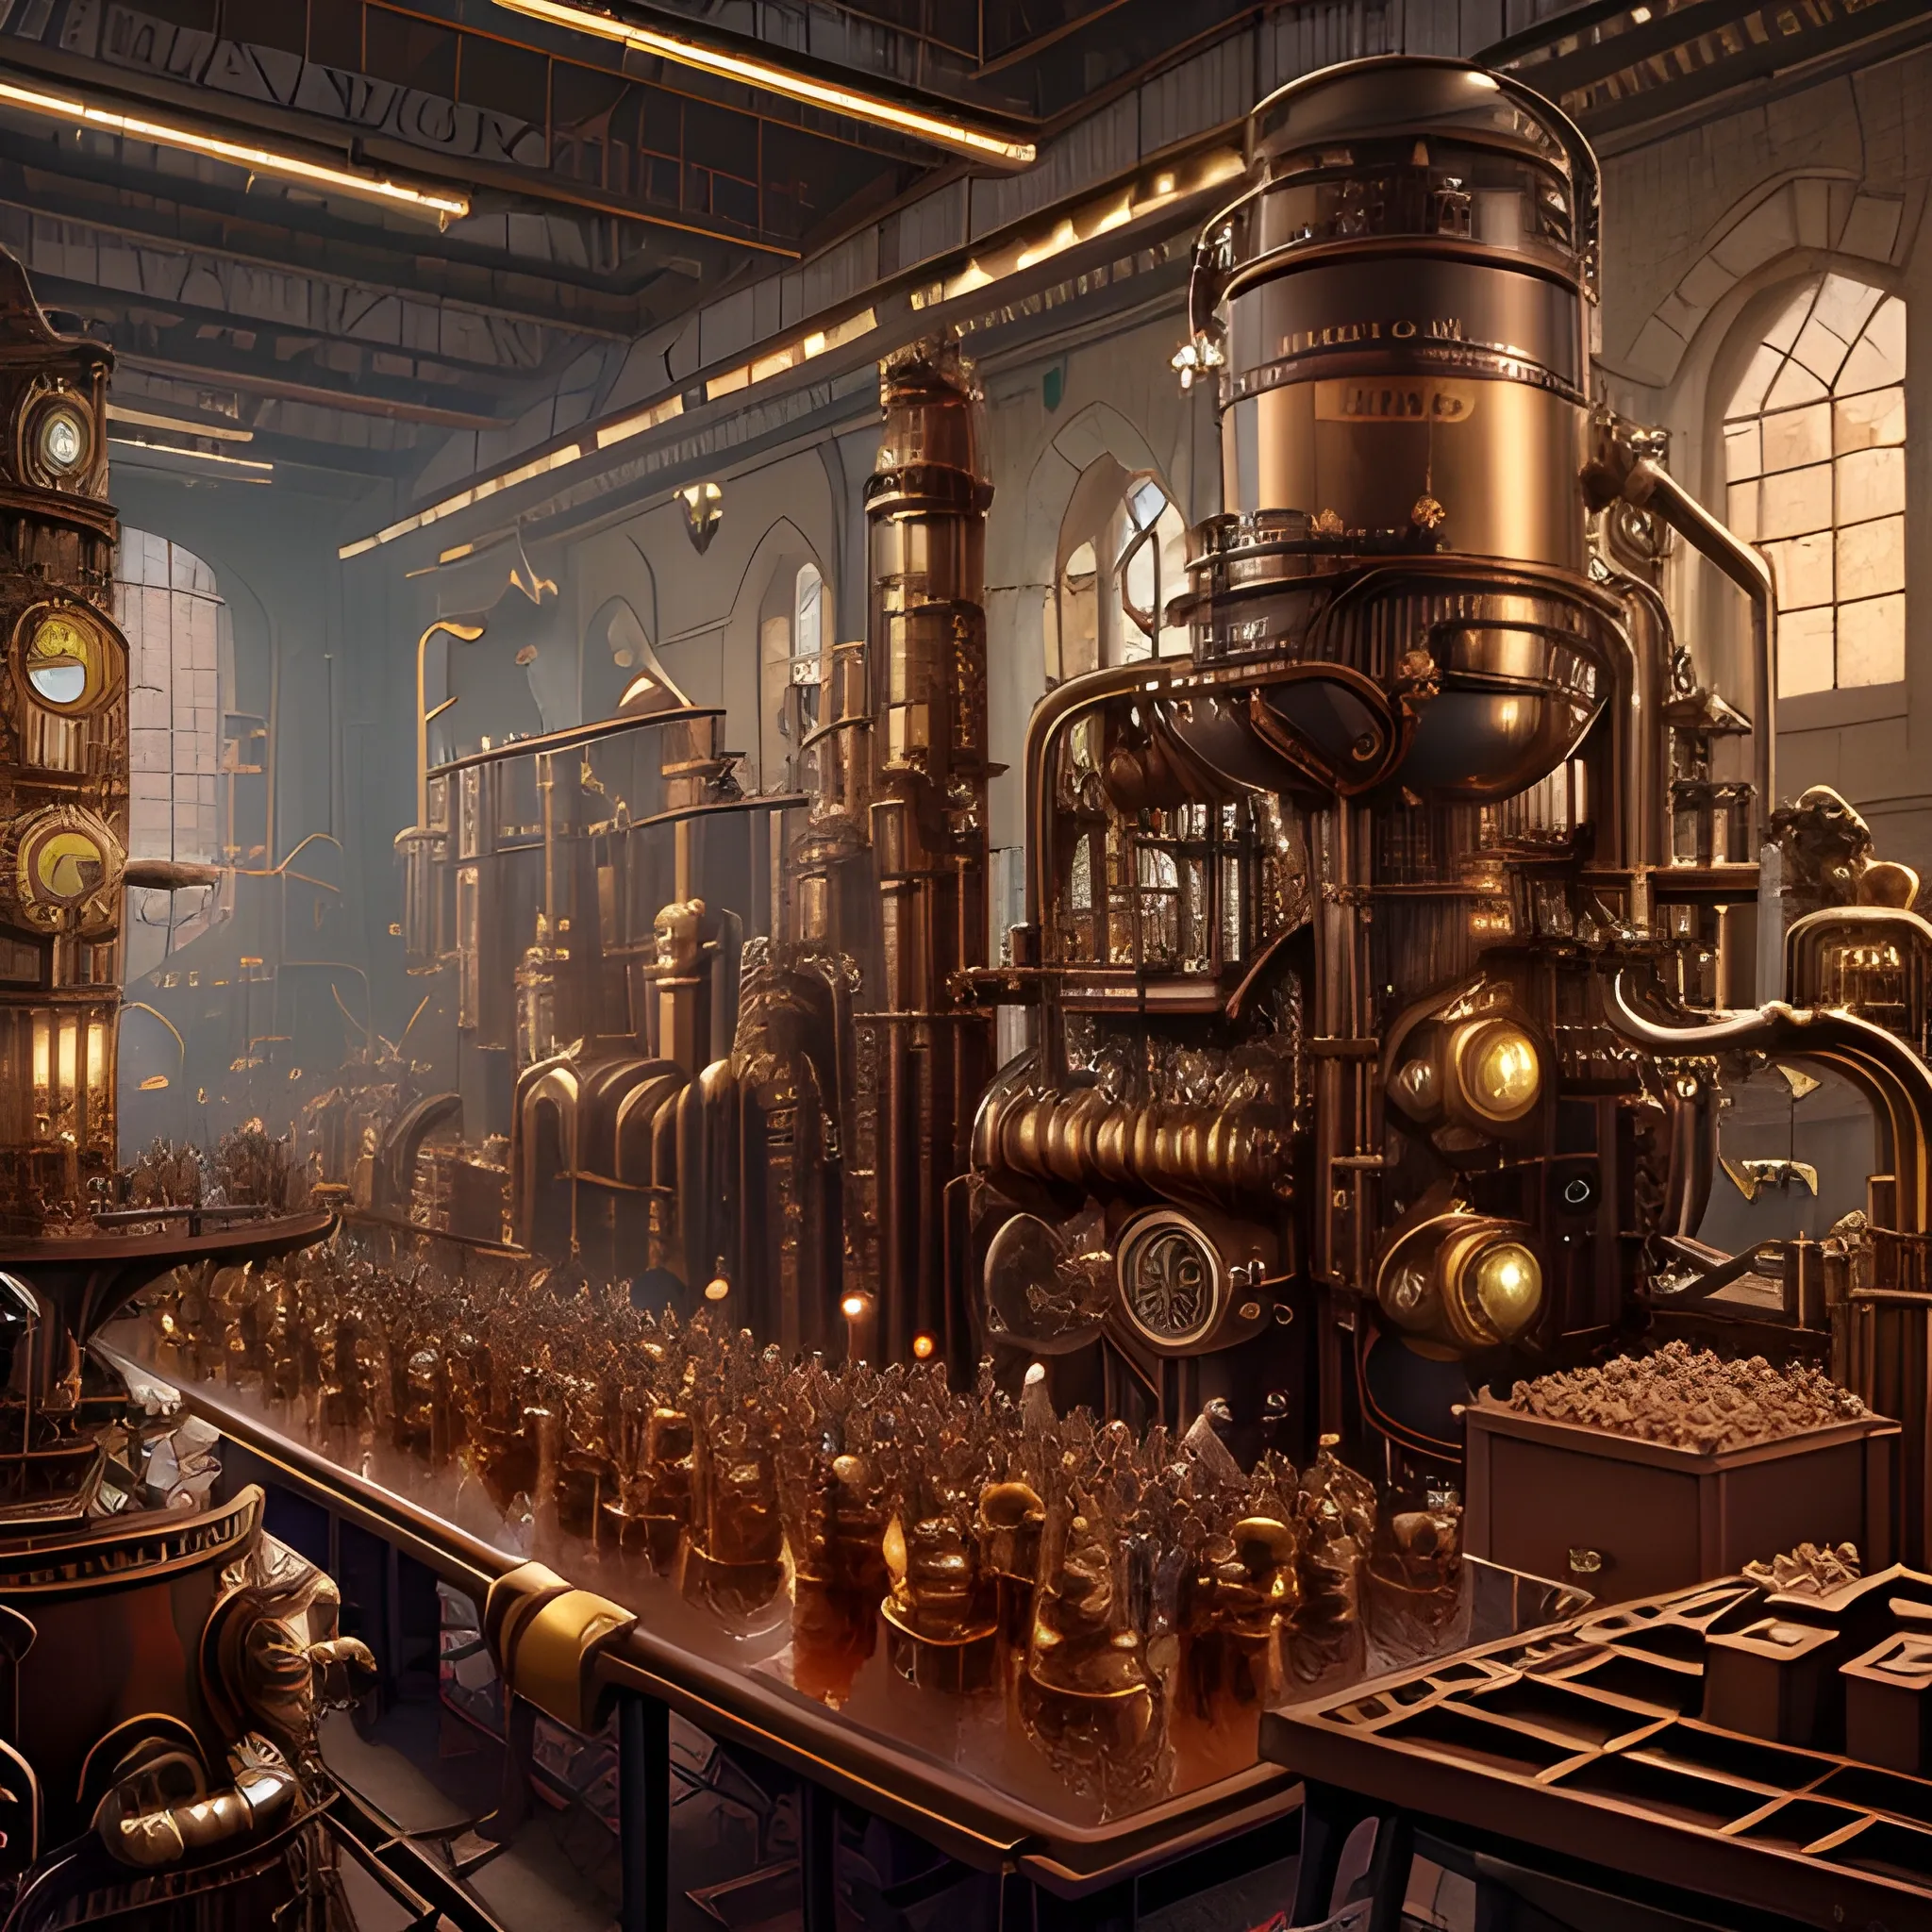 8k, Masterpiece, steampunk chocolate factory overflowing with liquid chocolate, chocolate assembly lines, matte, award-winning, cinematic quality, photorealism